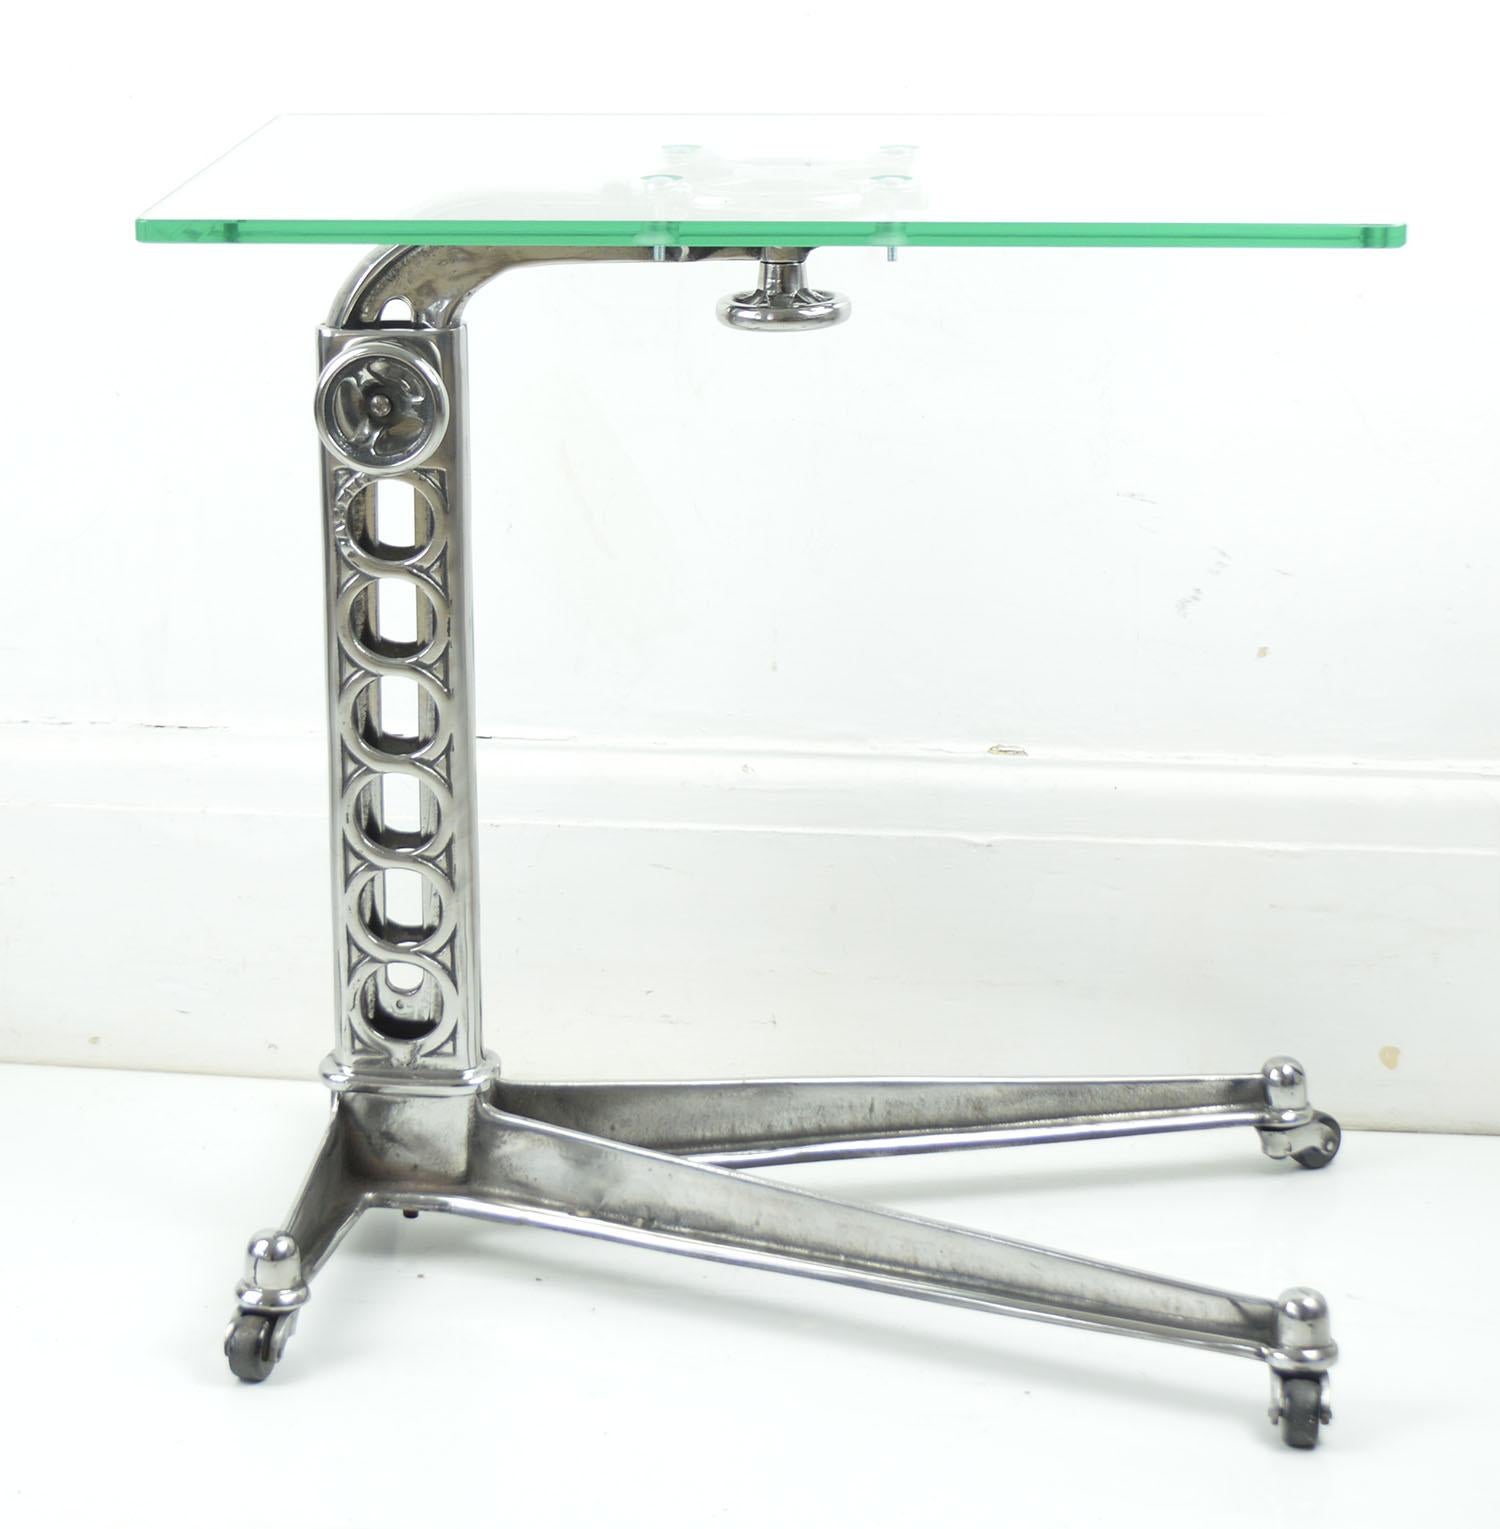 Polished Vintage Industrial Adjustable High to Low Work Table, English, 1920s